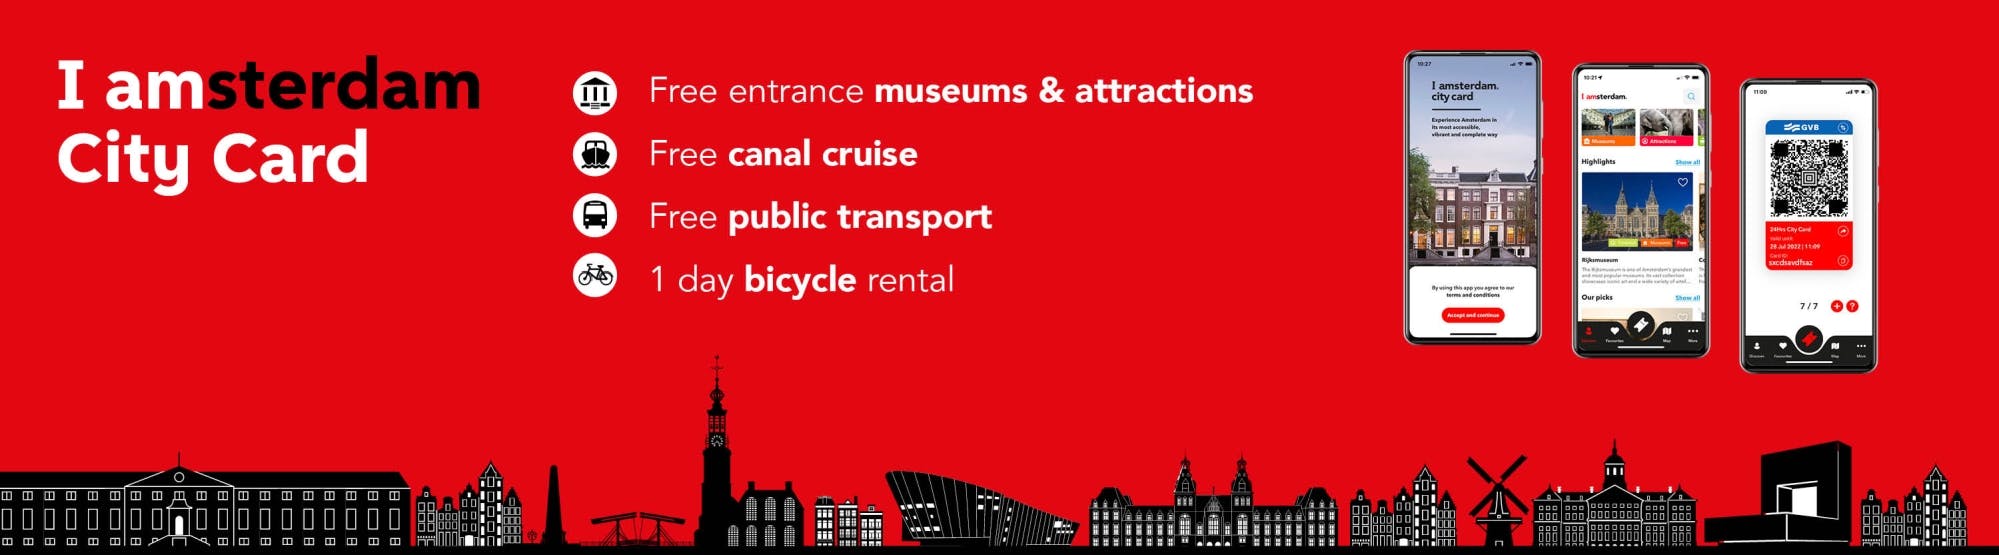 I amsterdam City Card for 24 48 72 96 or 120 hours Musement